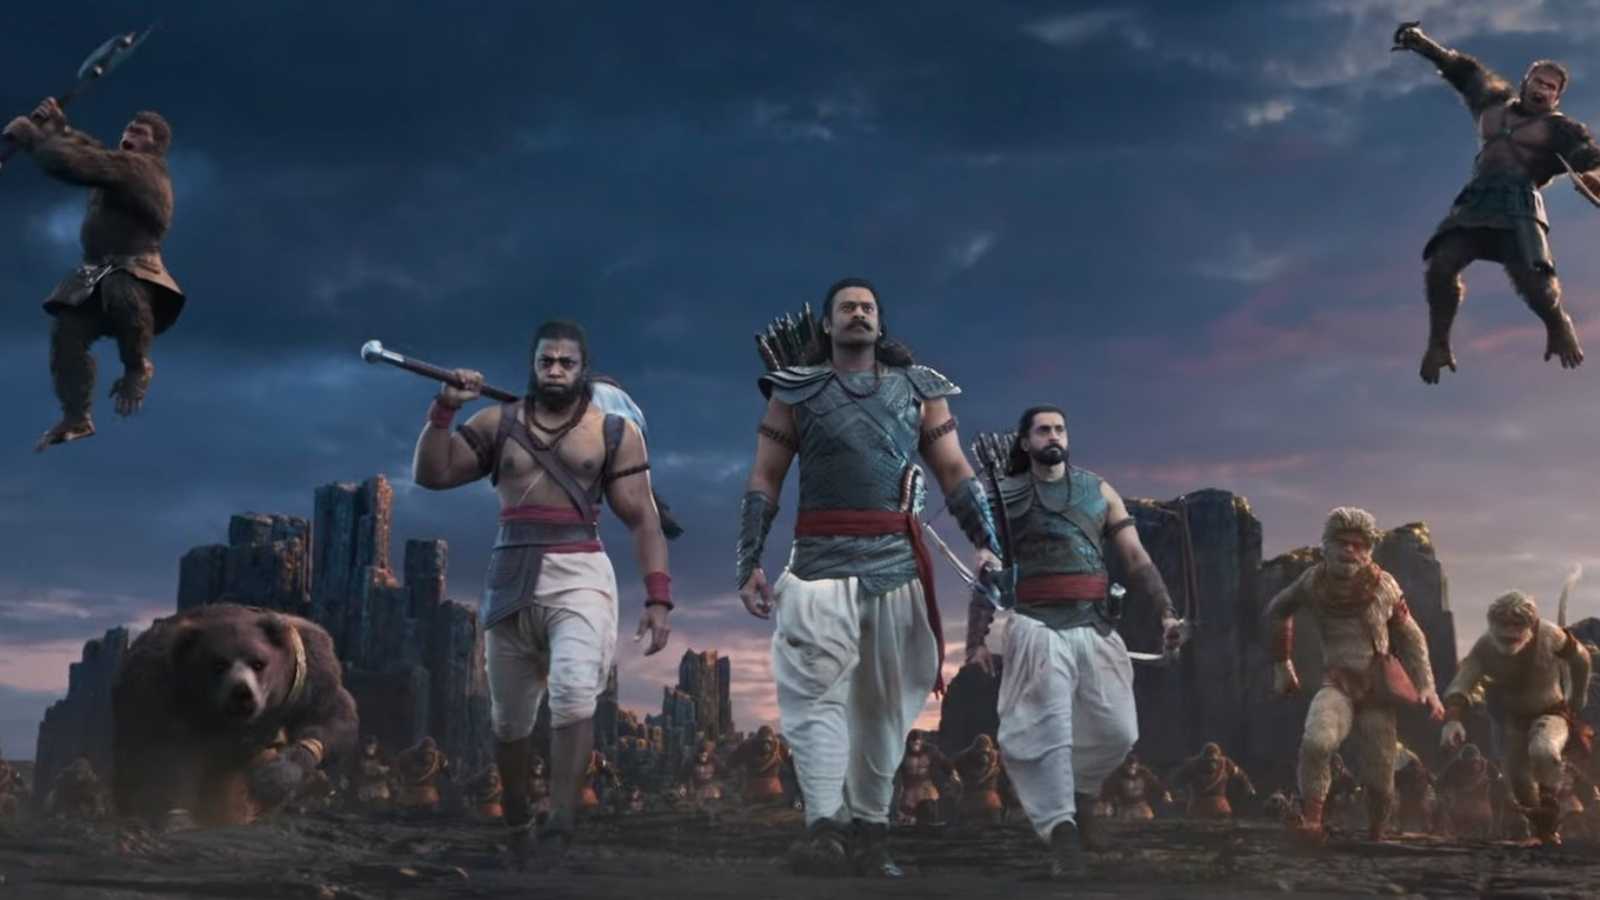 Adipurush teaser declared to be fit for 'Cartoon Network' as netizens rip apart the highly animated visuals of Prabhas' film